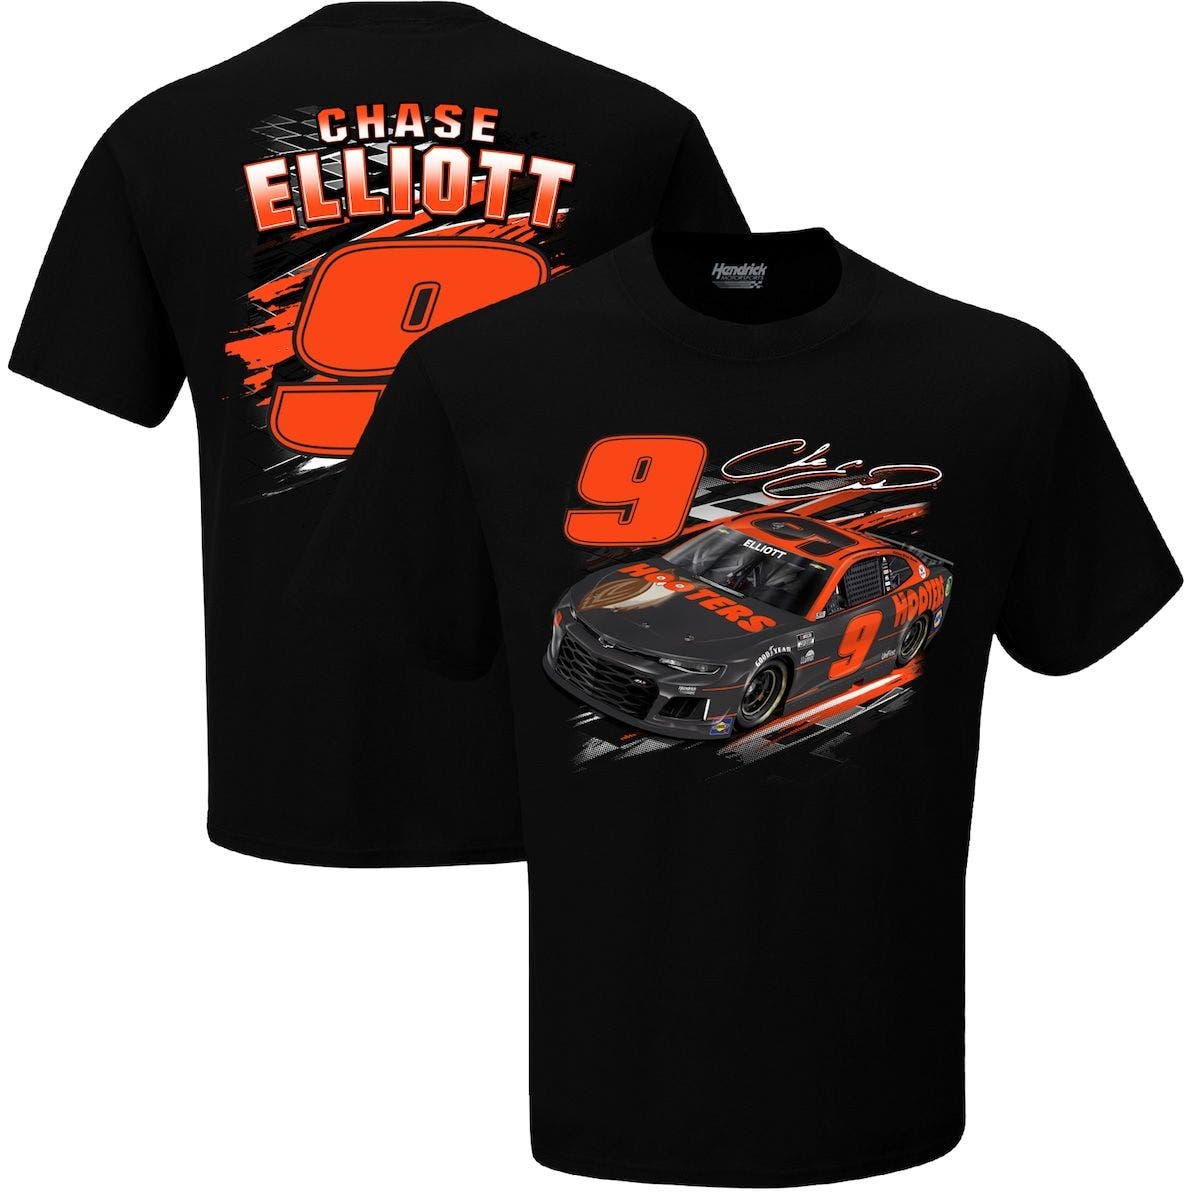 HENDRICK MOTORSPORTS TEAM COLLECTION Men's Hendrick Motorsports Team Collection Black Chase Elliott Hooters Fuel T-Shirt at Nordstrom